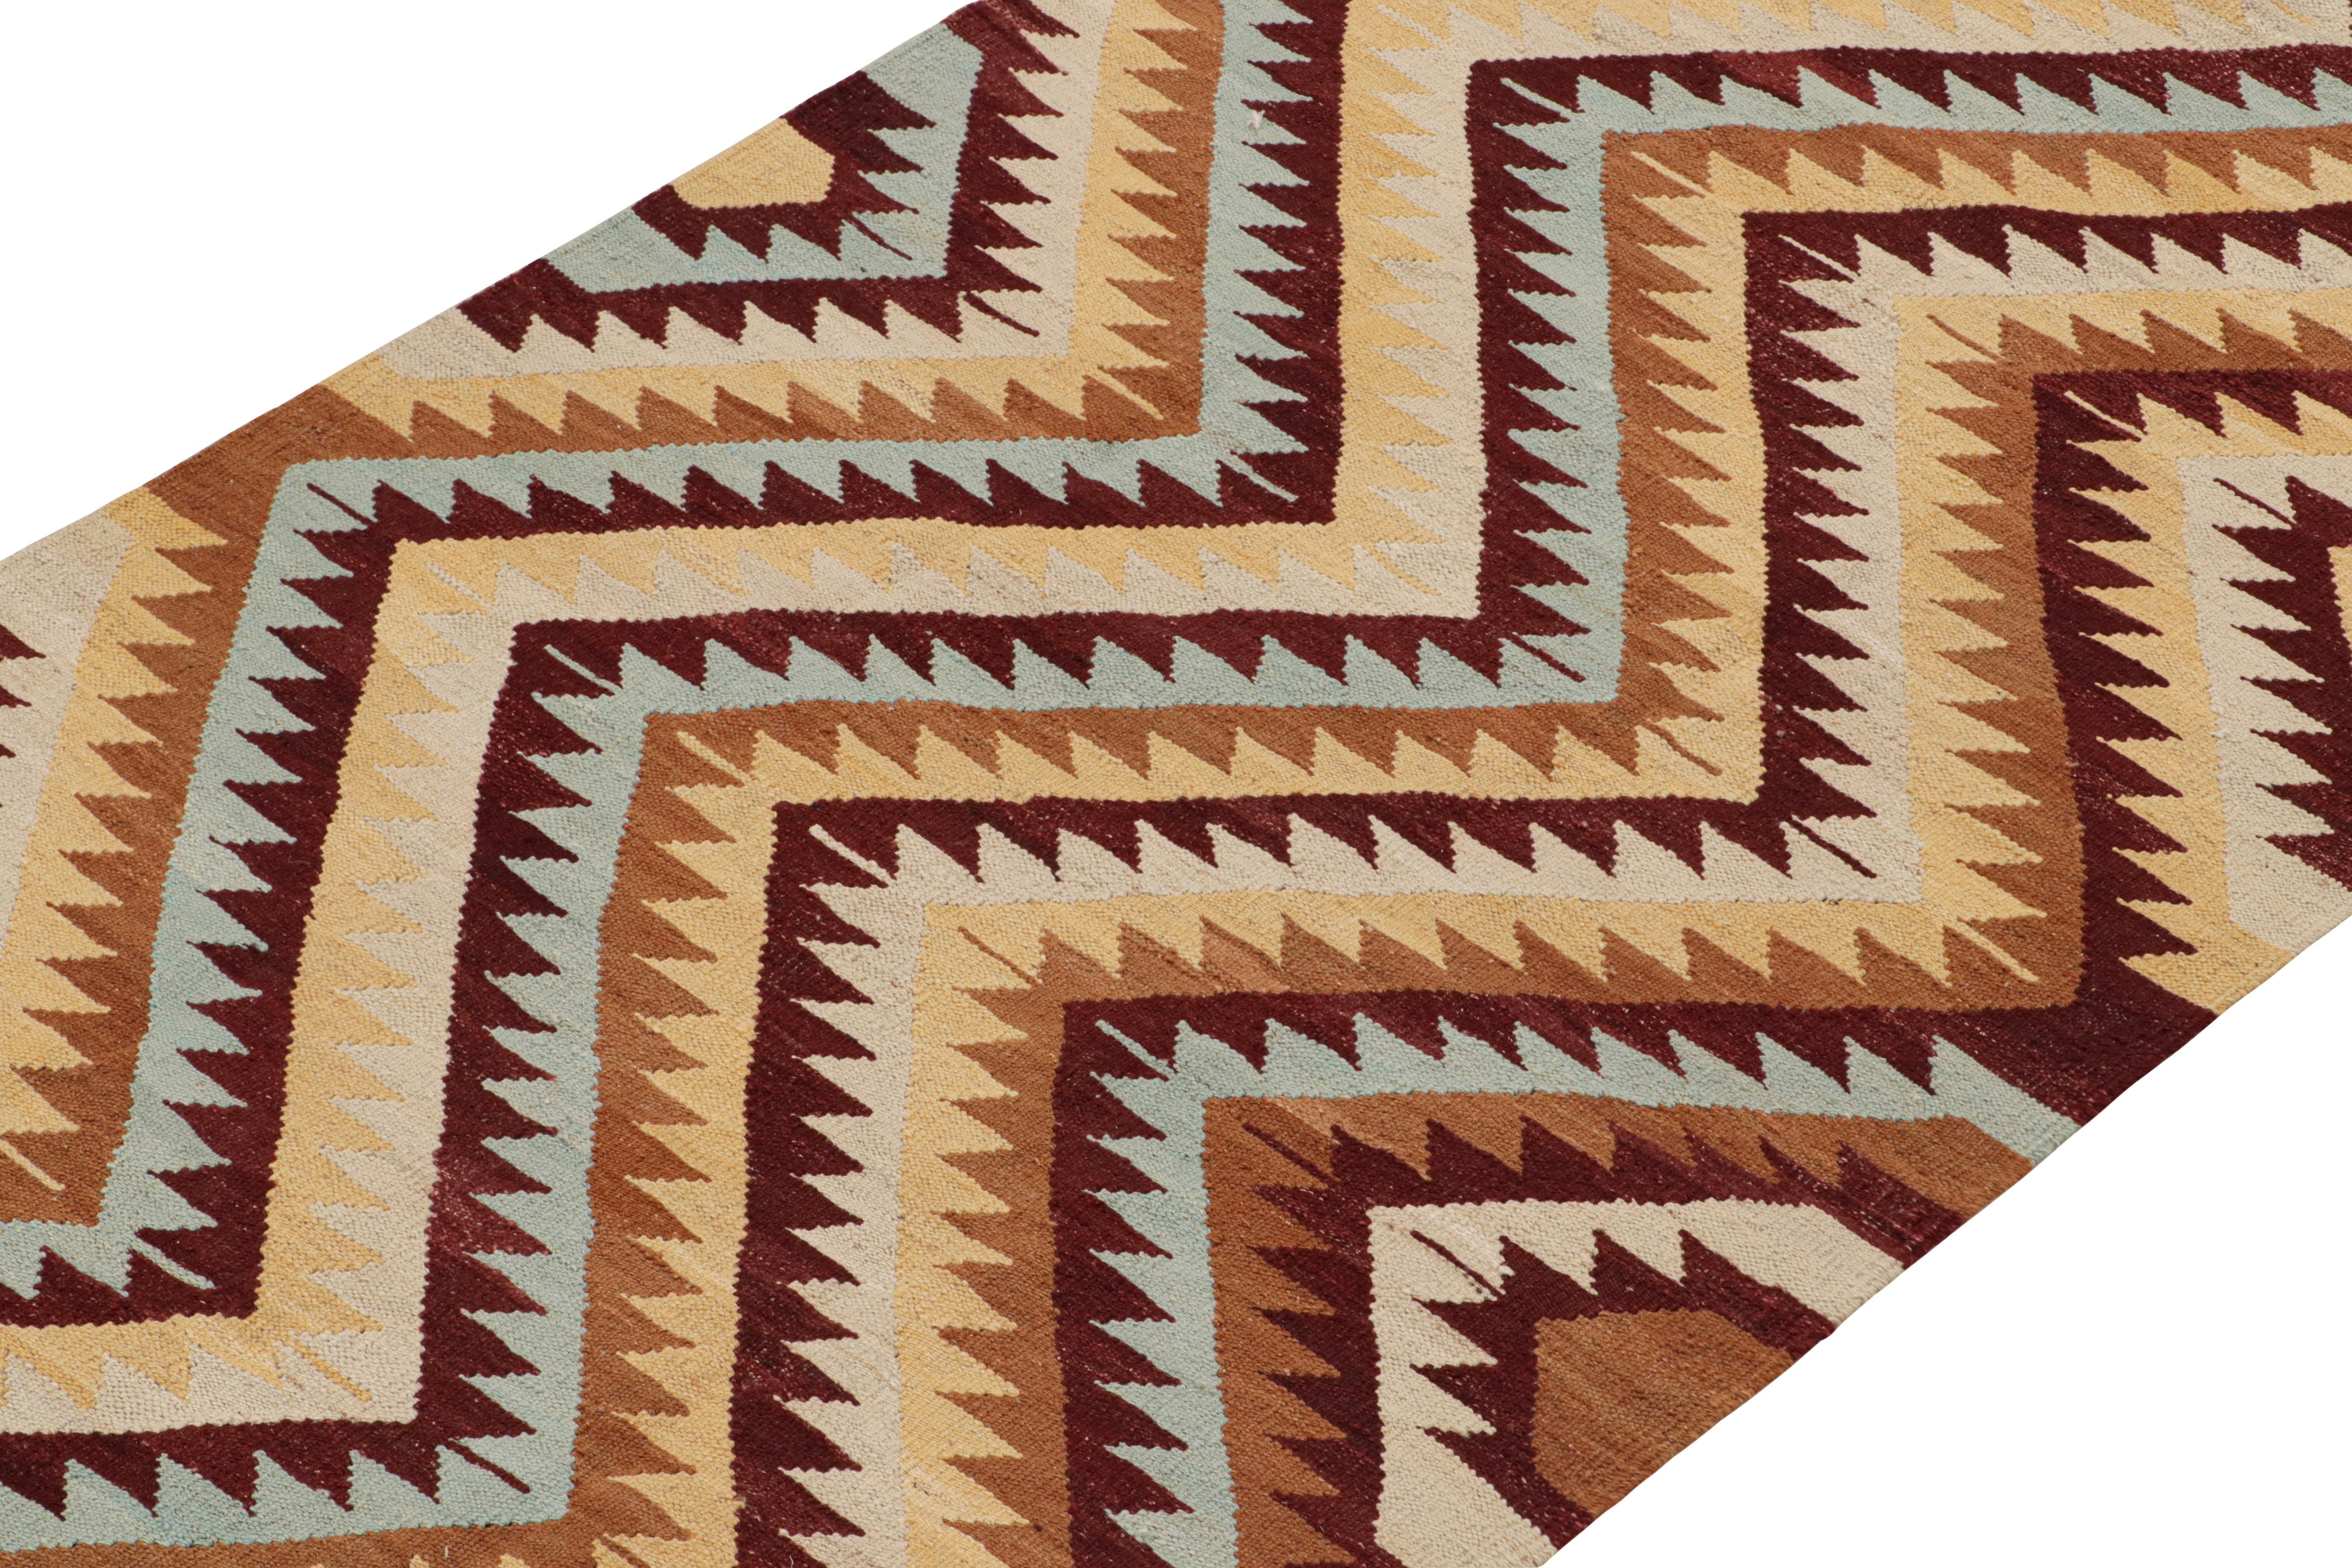 Handwoven in wool, this contemporary 4x12 Kilim by Rug & Kilim is inspired by antique tribal Kilims and flatweaves. 

On the Design:

This runner enjoys a play of chevrons and geometric patterns in burgundy, beige-brown, sky blue and gold hues. Keen